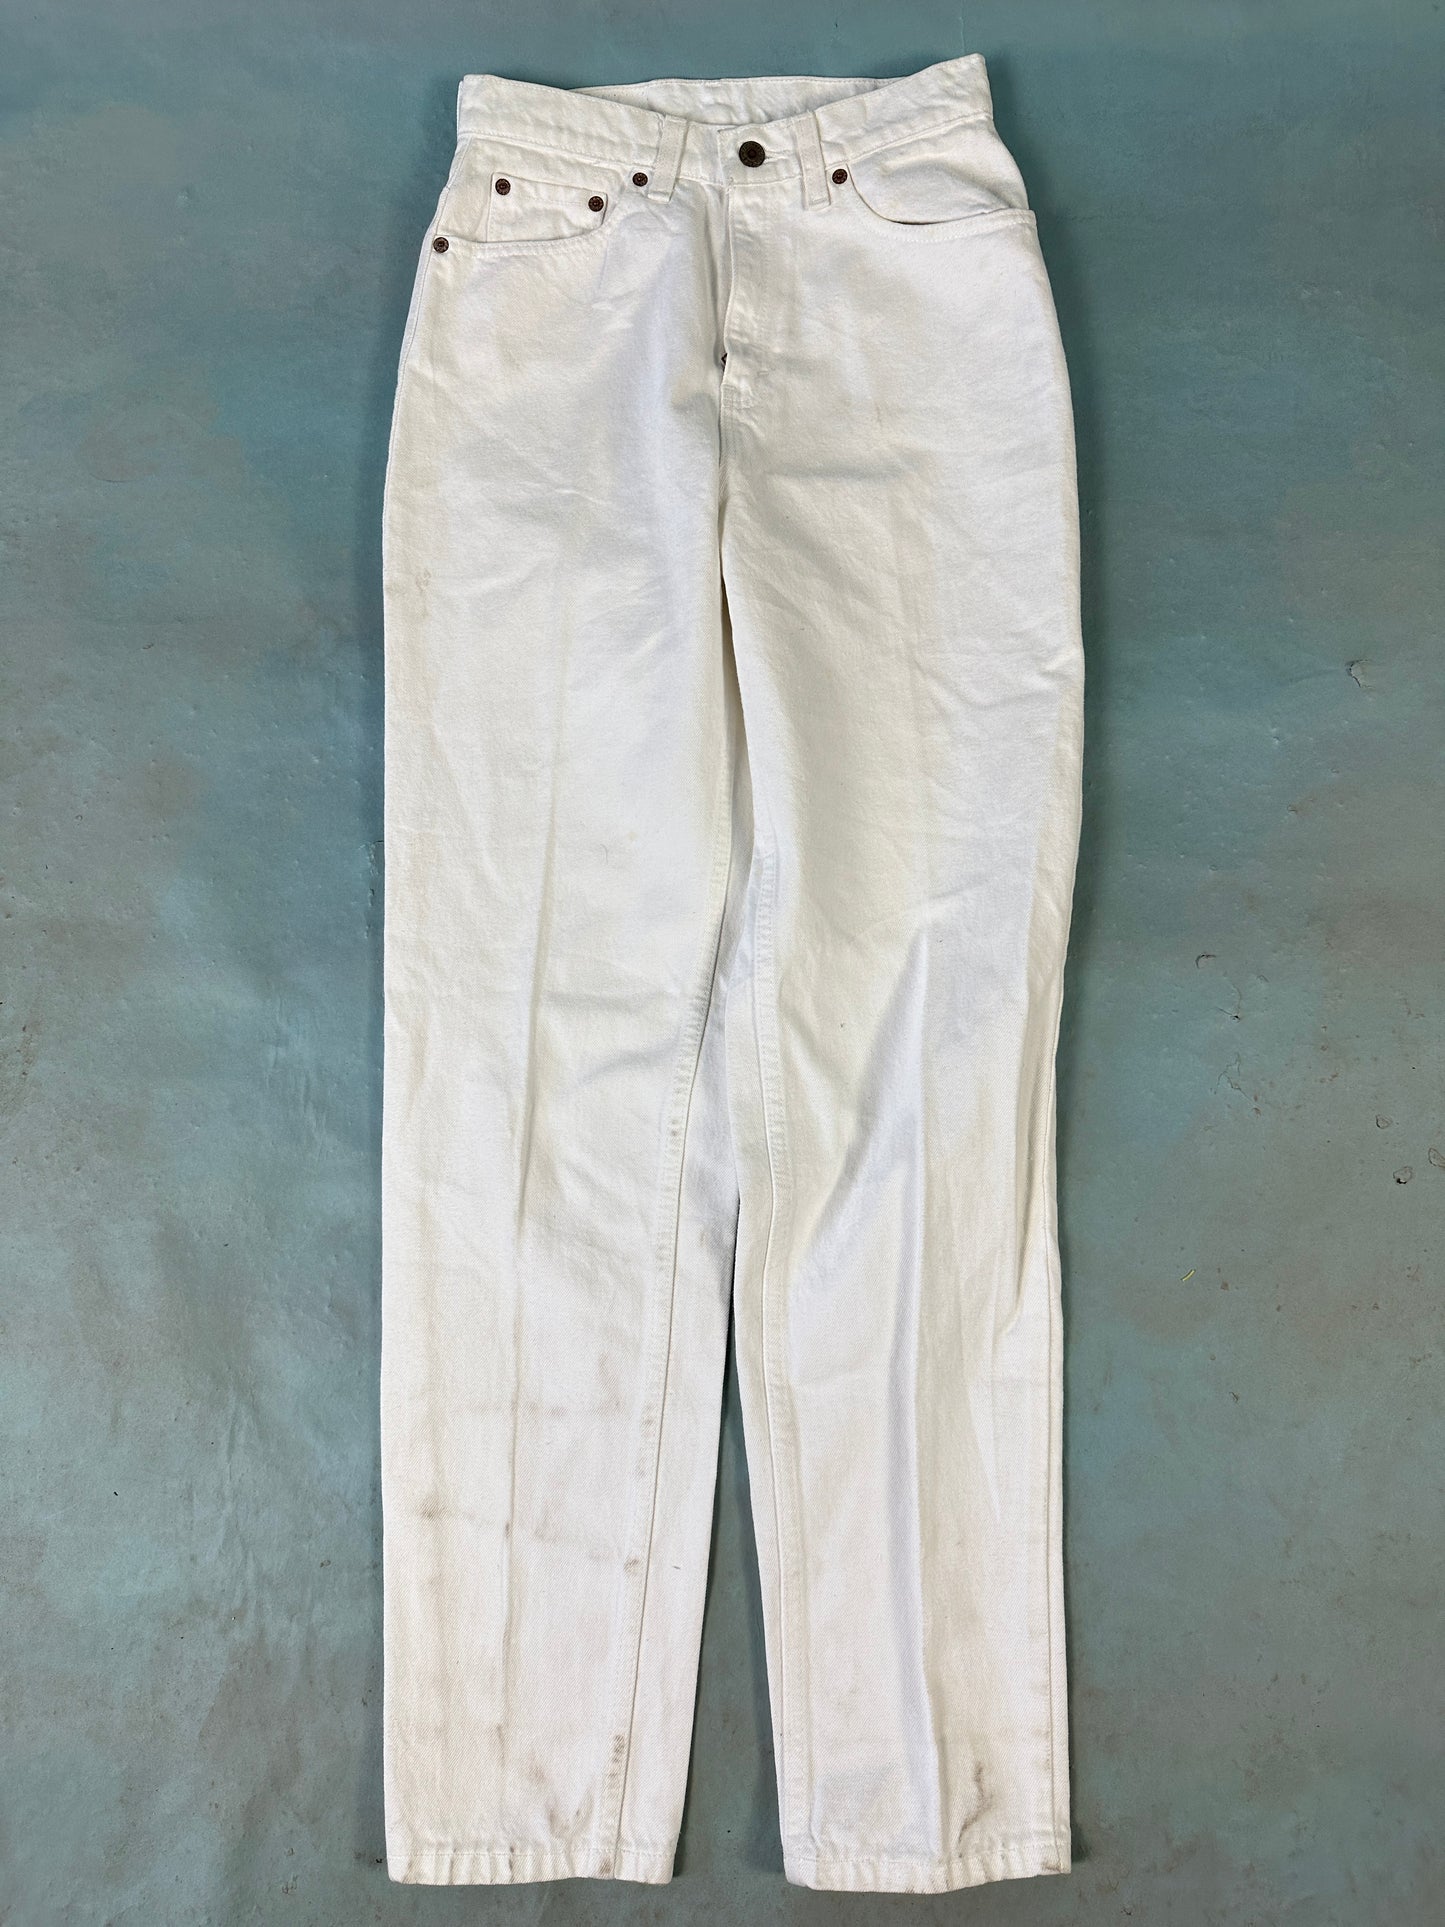 Levis White Vintage Red Tab Jeans - 28 x 31